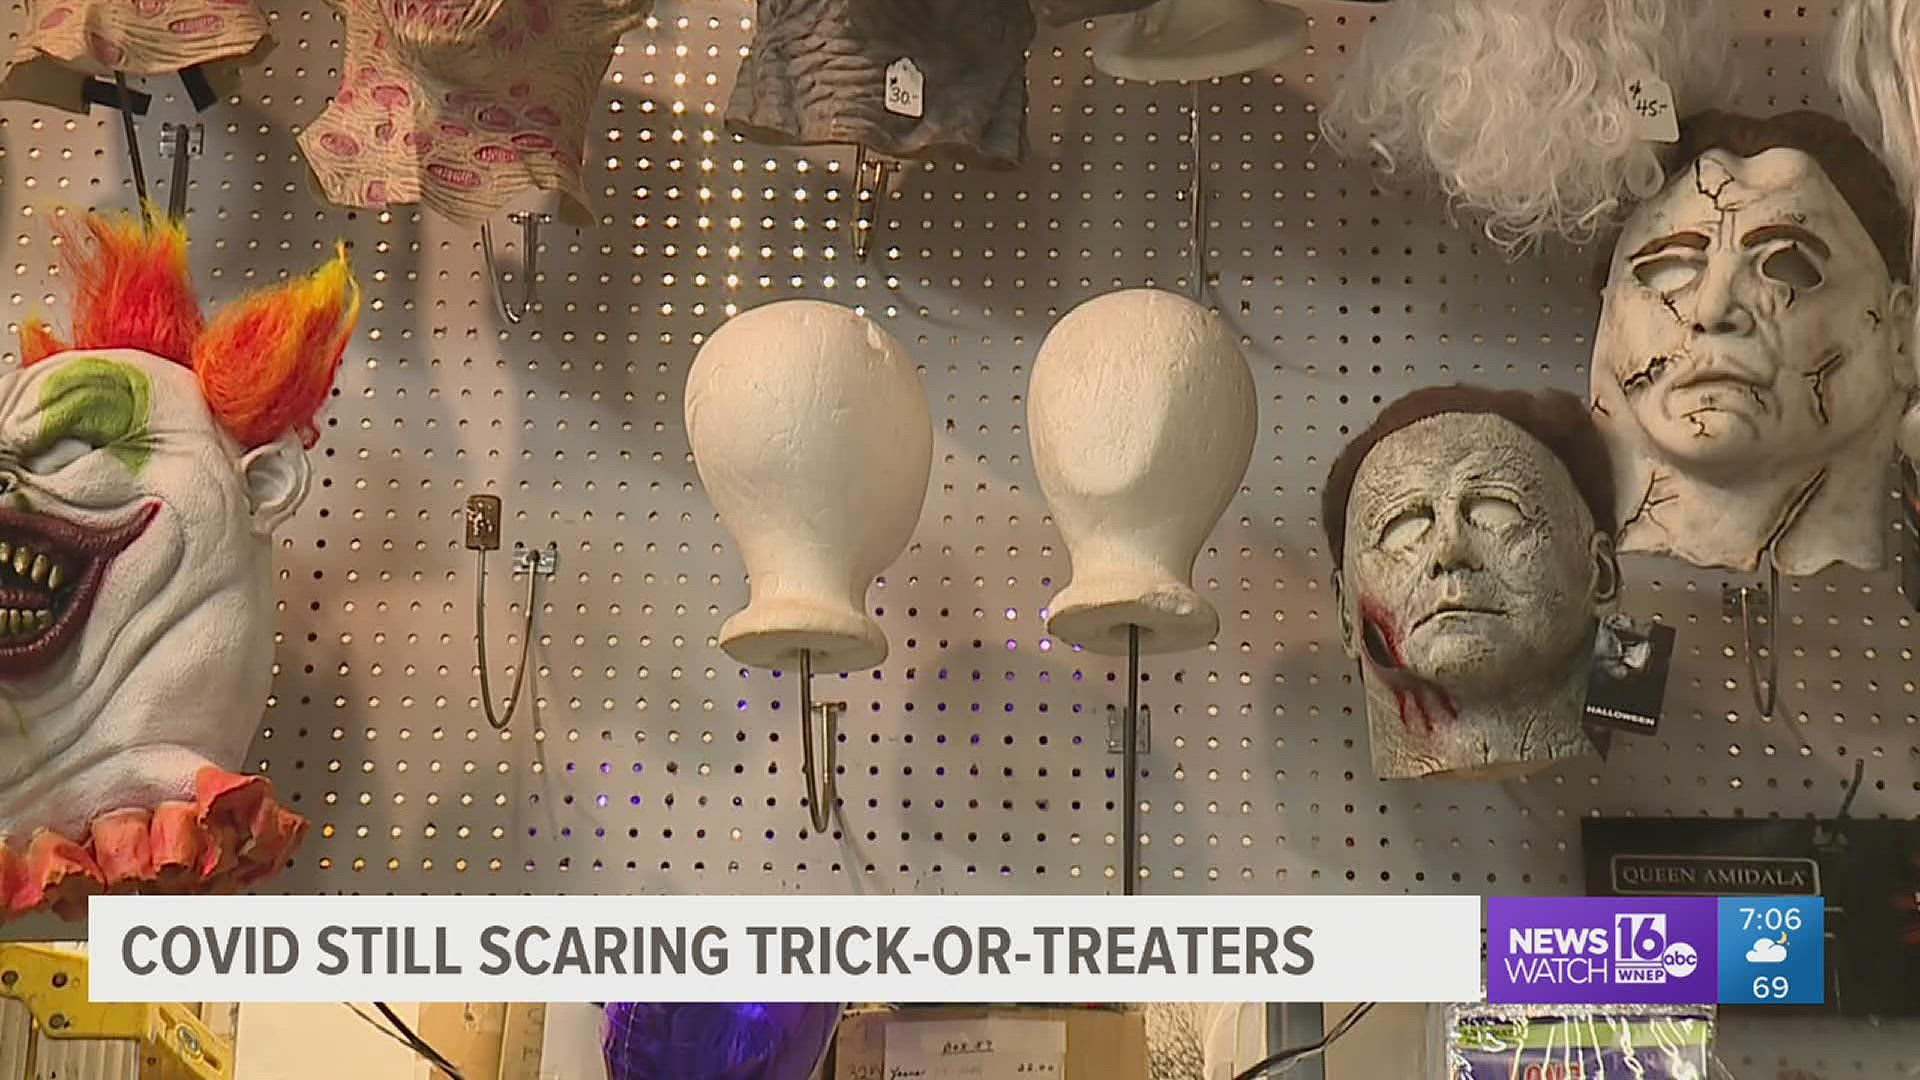 Businesses report only slight improvement in Halloween sales since last year.